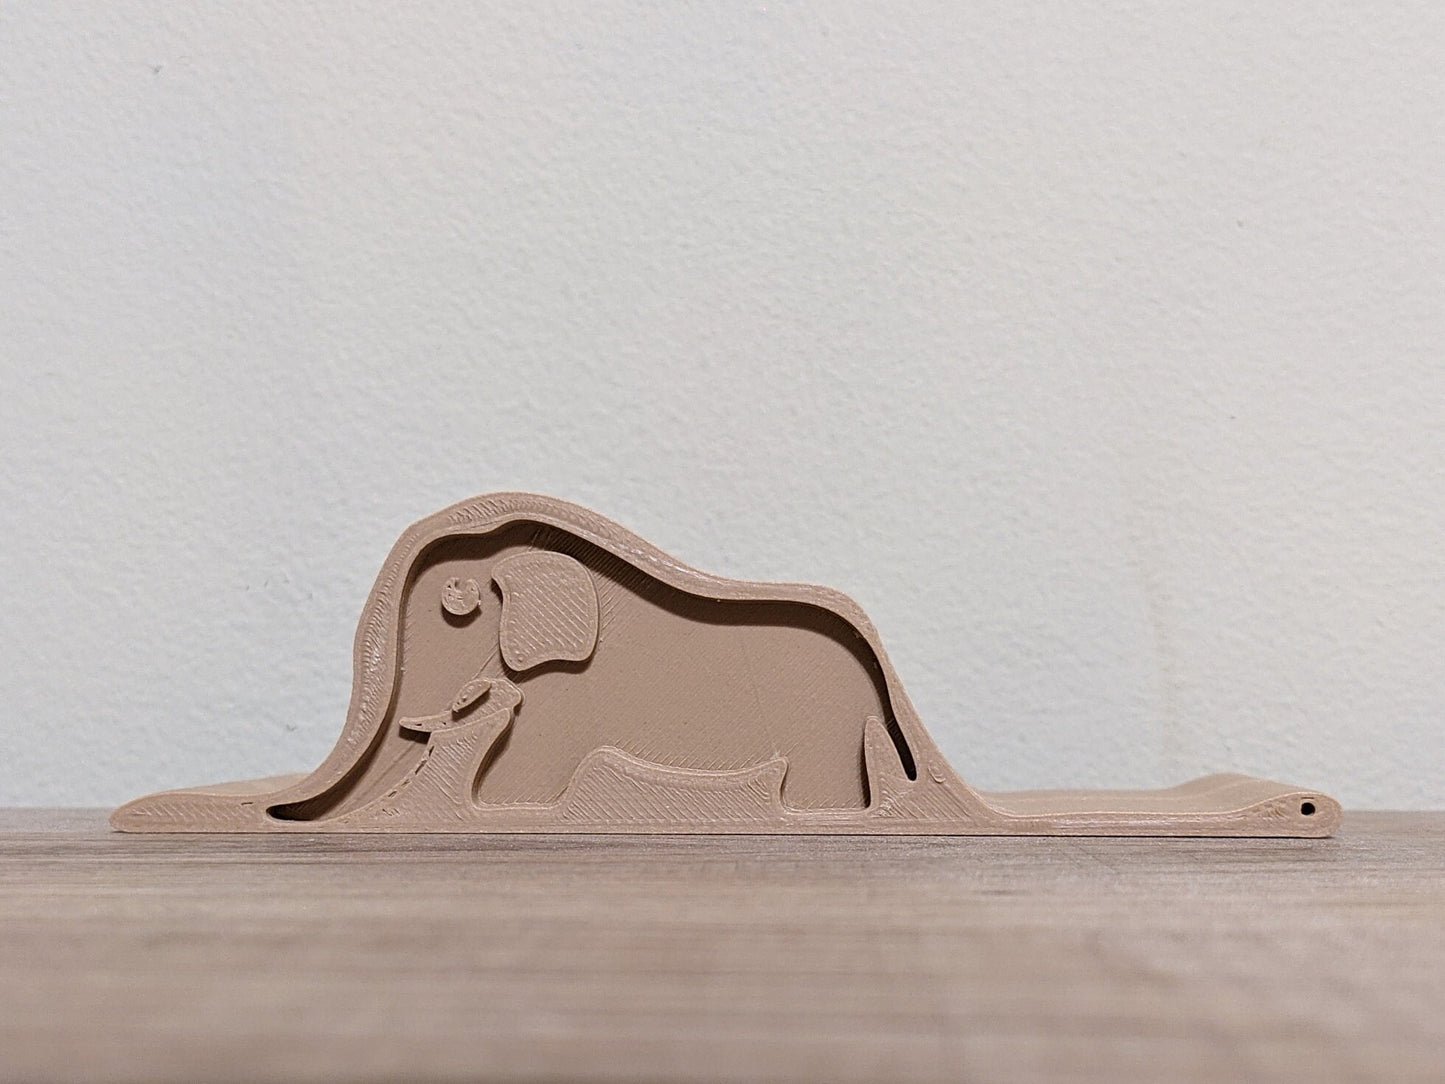 The Little Prince "Boa Digesting an Elephant" Business Card Holder